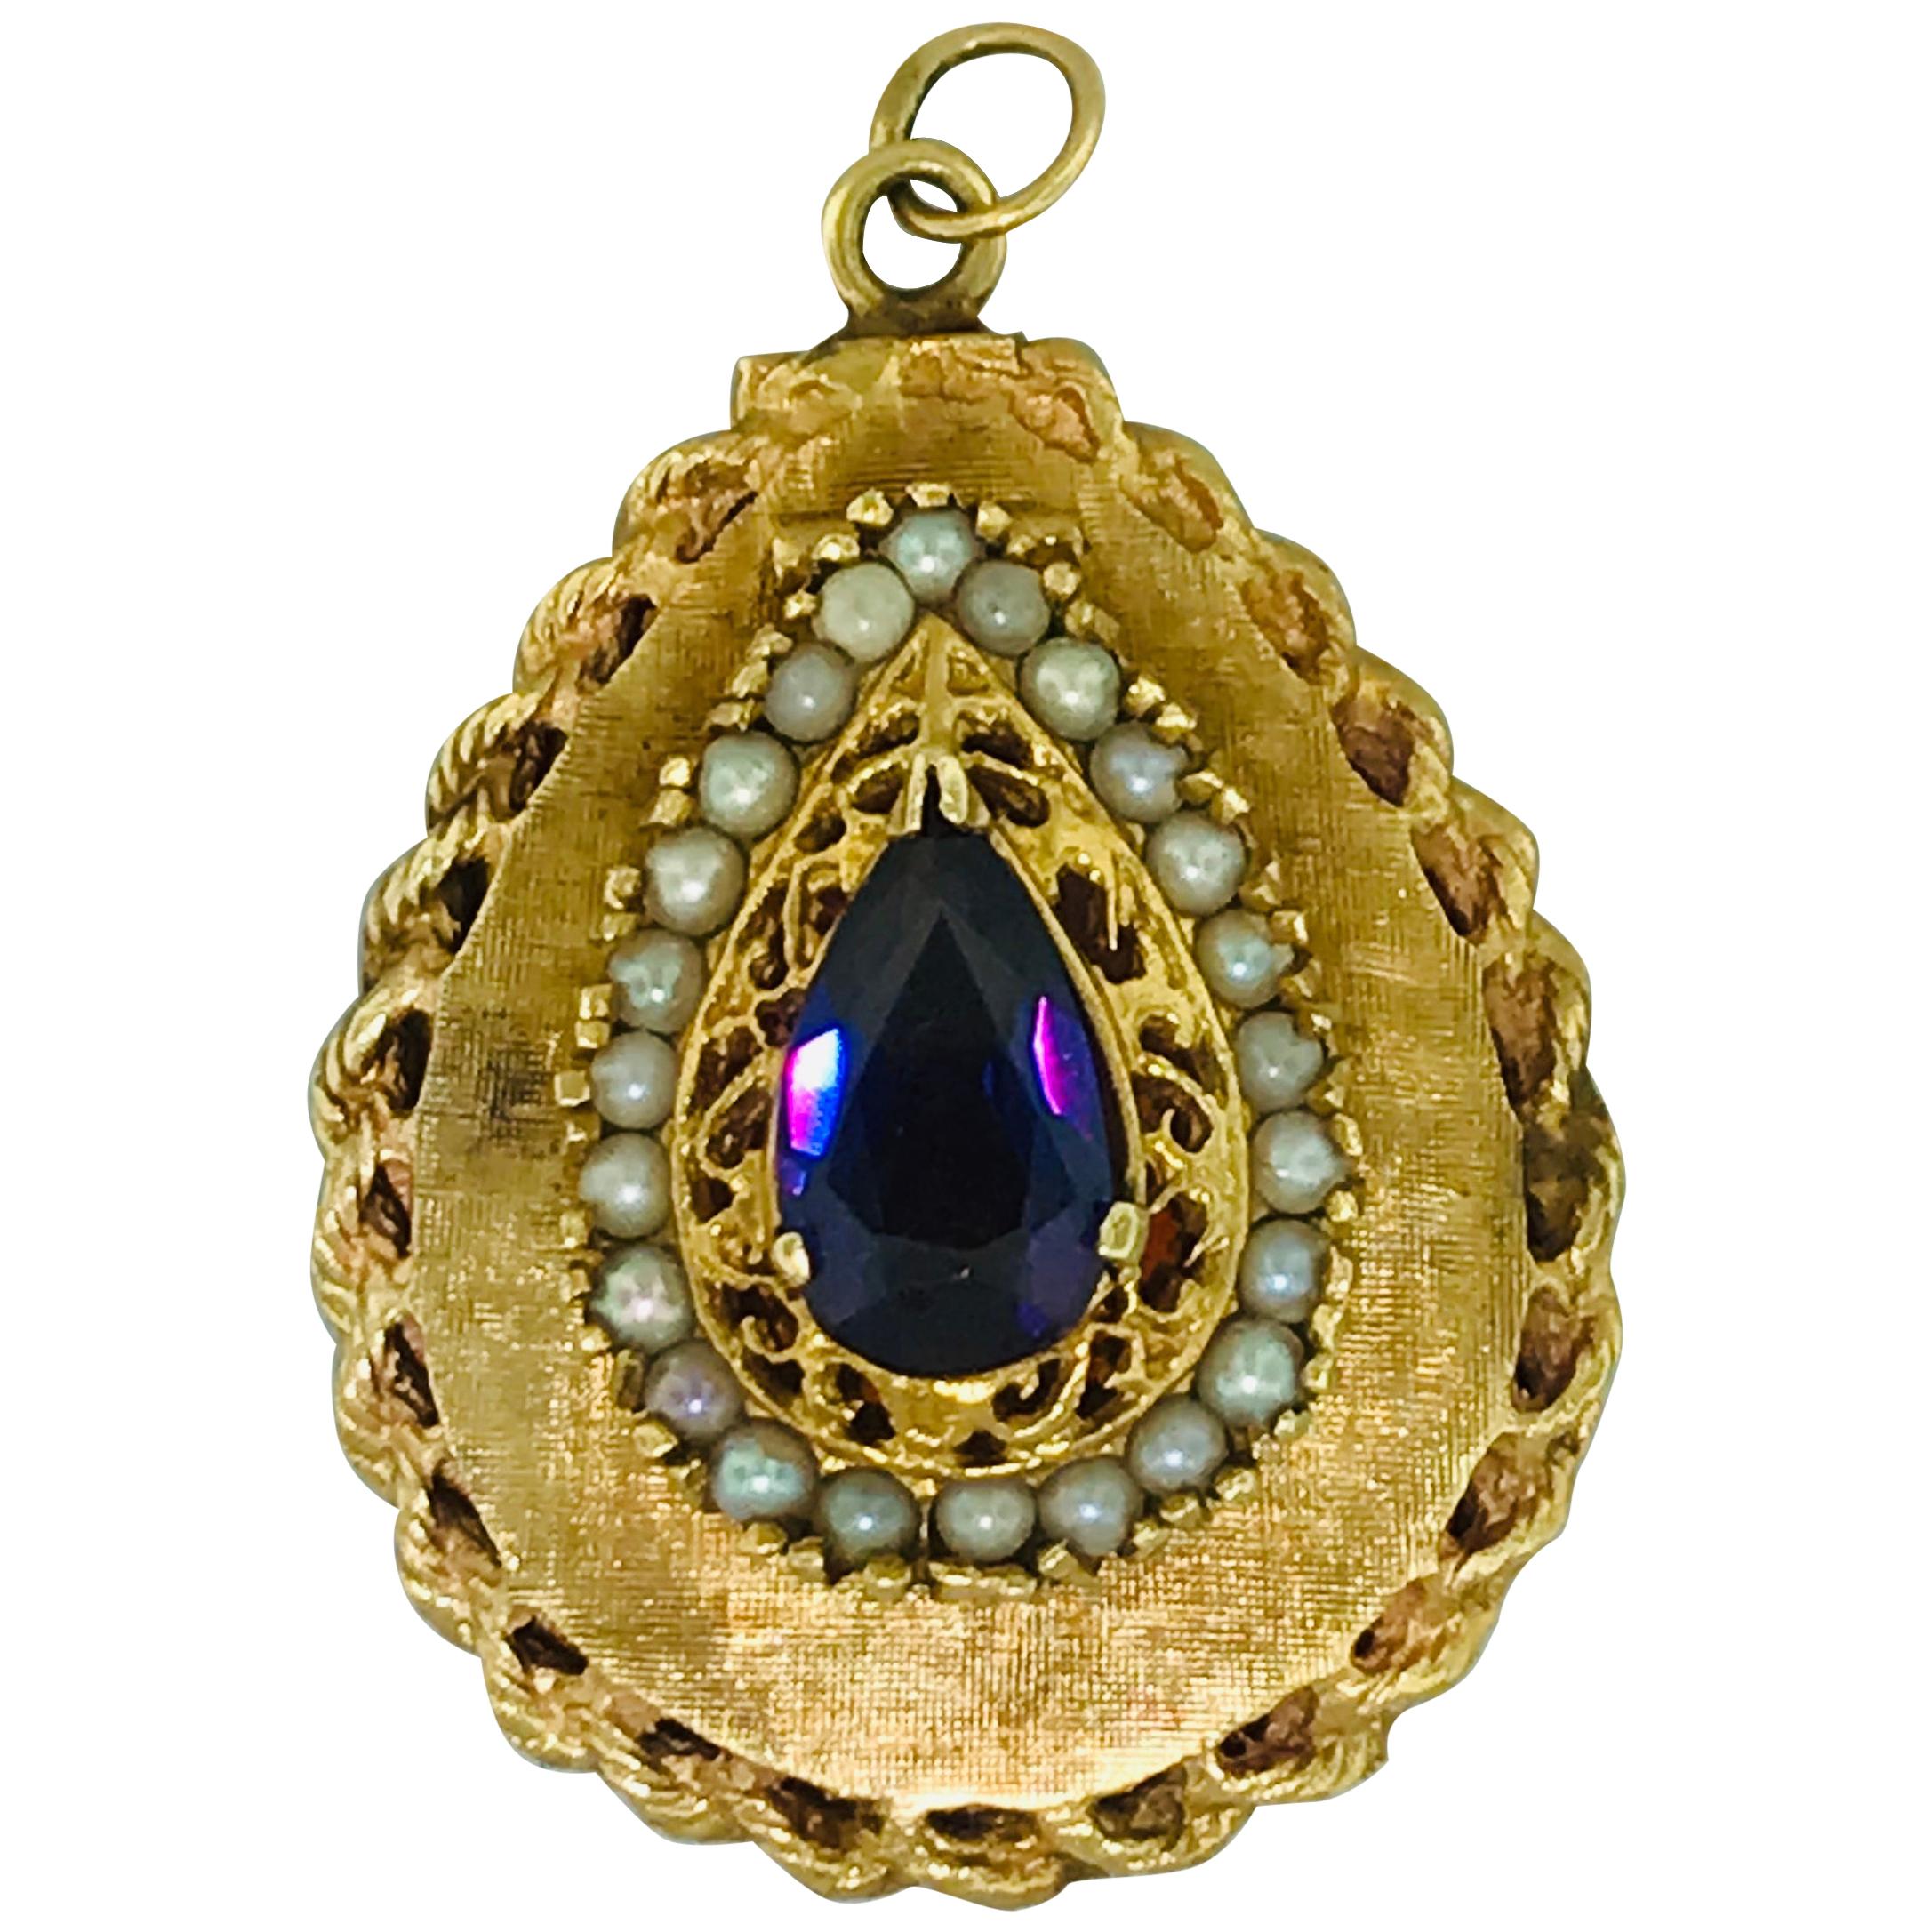 Estate Vintage Locket Pear Shape Amethyst Seed Pearl Pendant with Chain 14K Gold